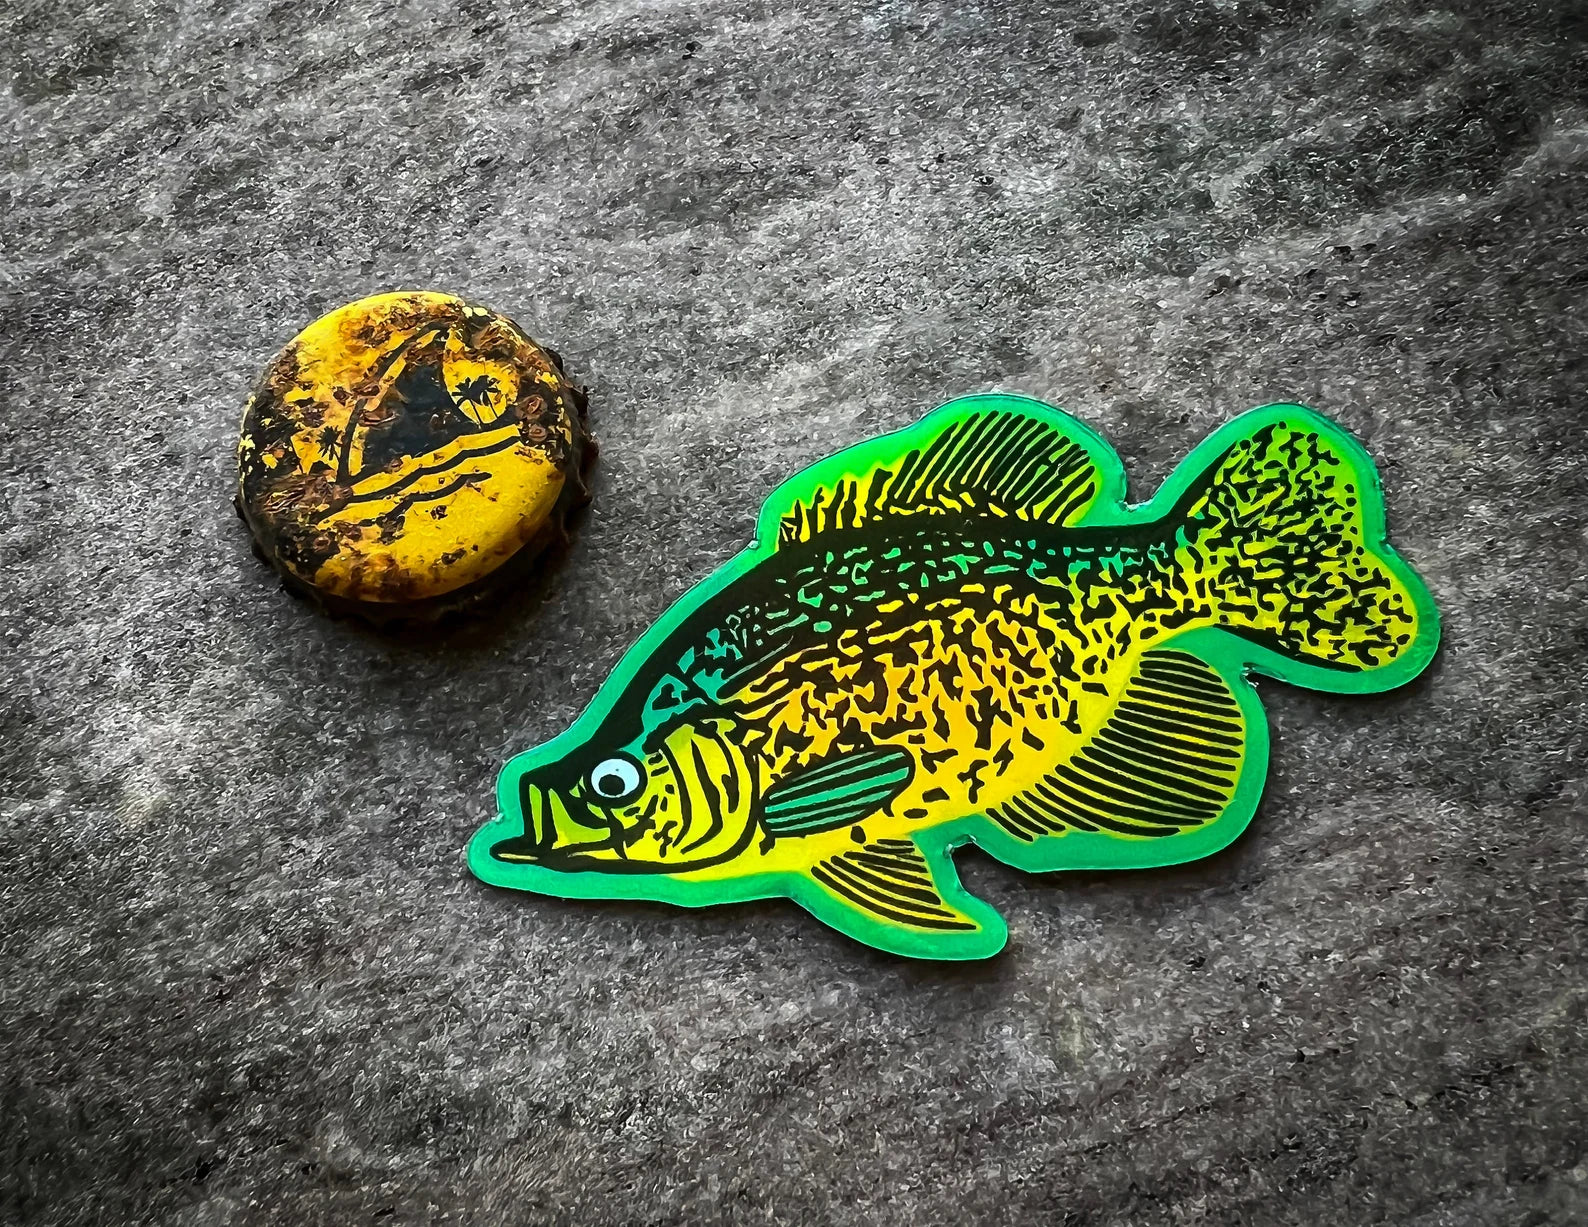 Crappie fish decal ***Free Shipping***